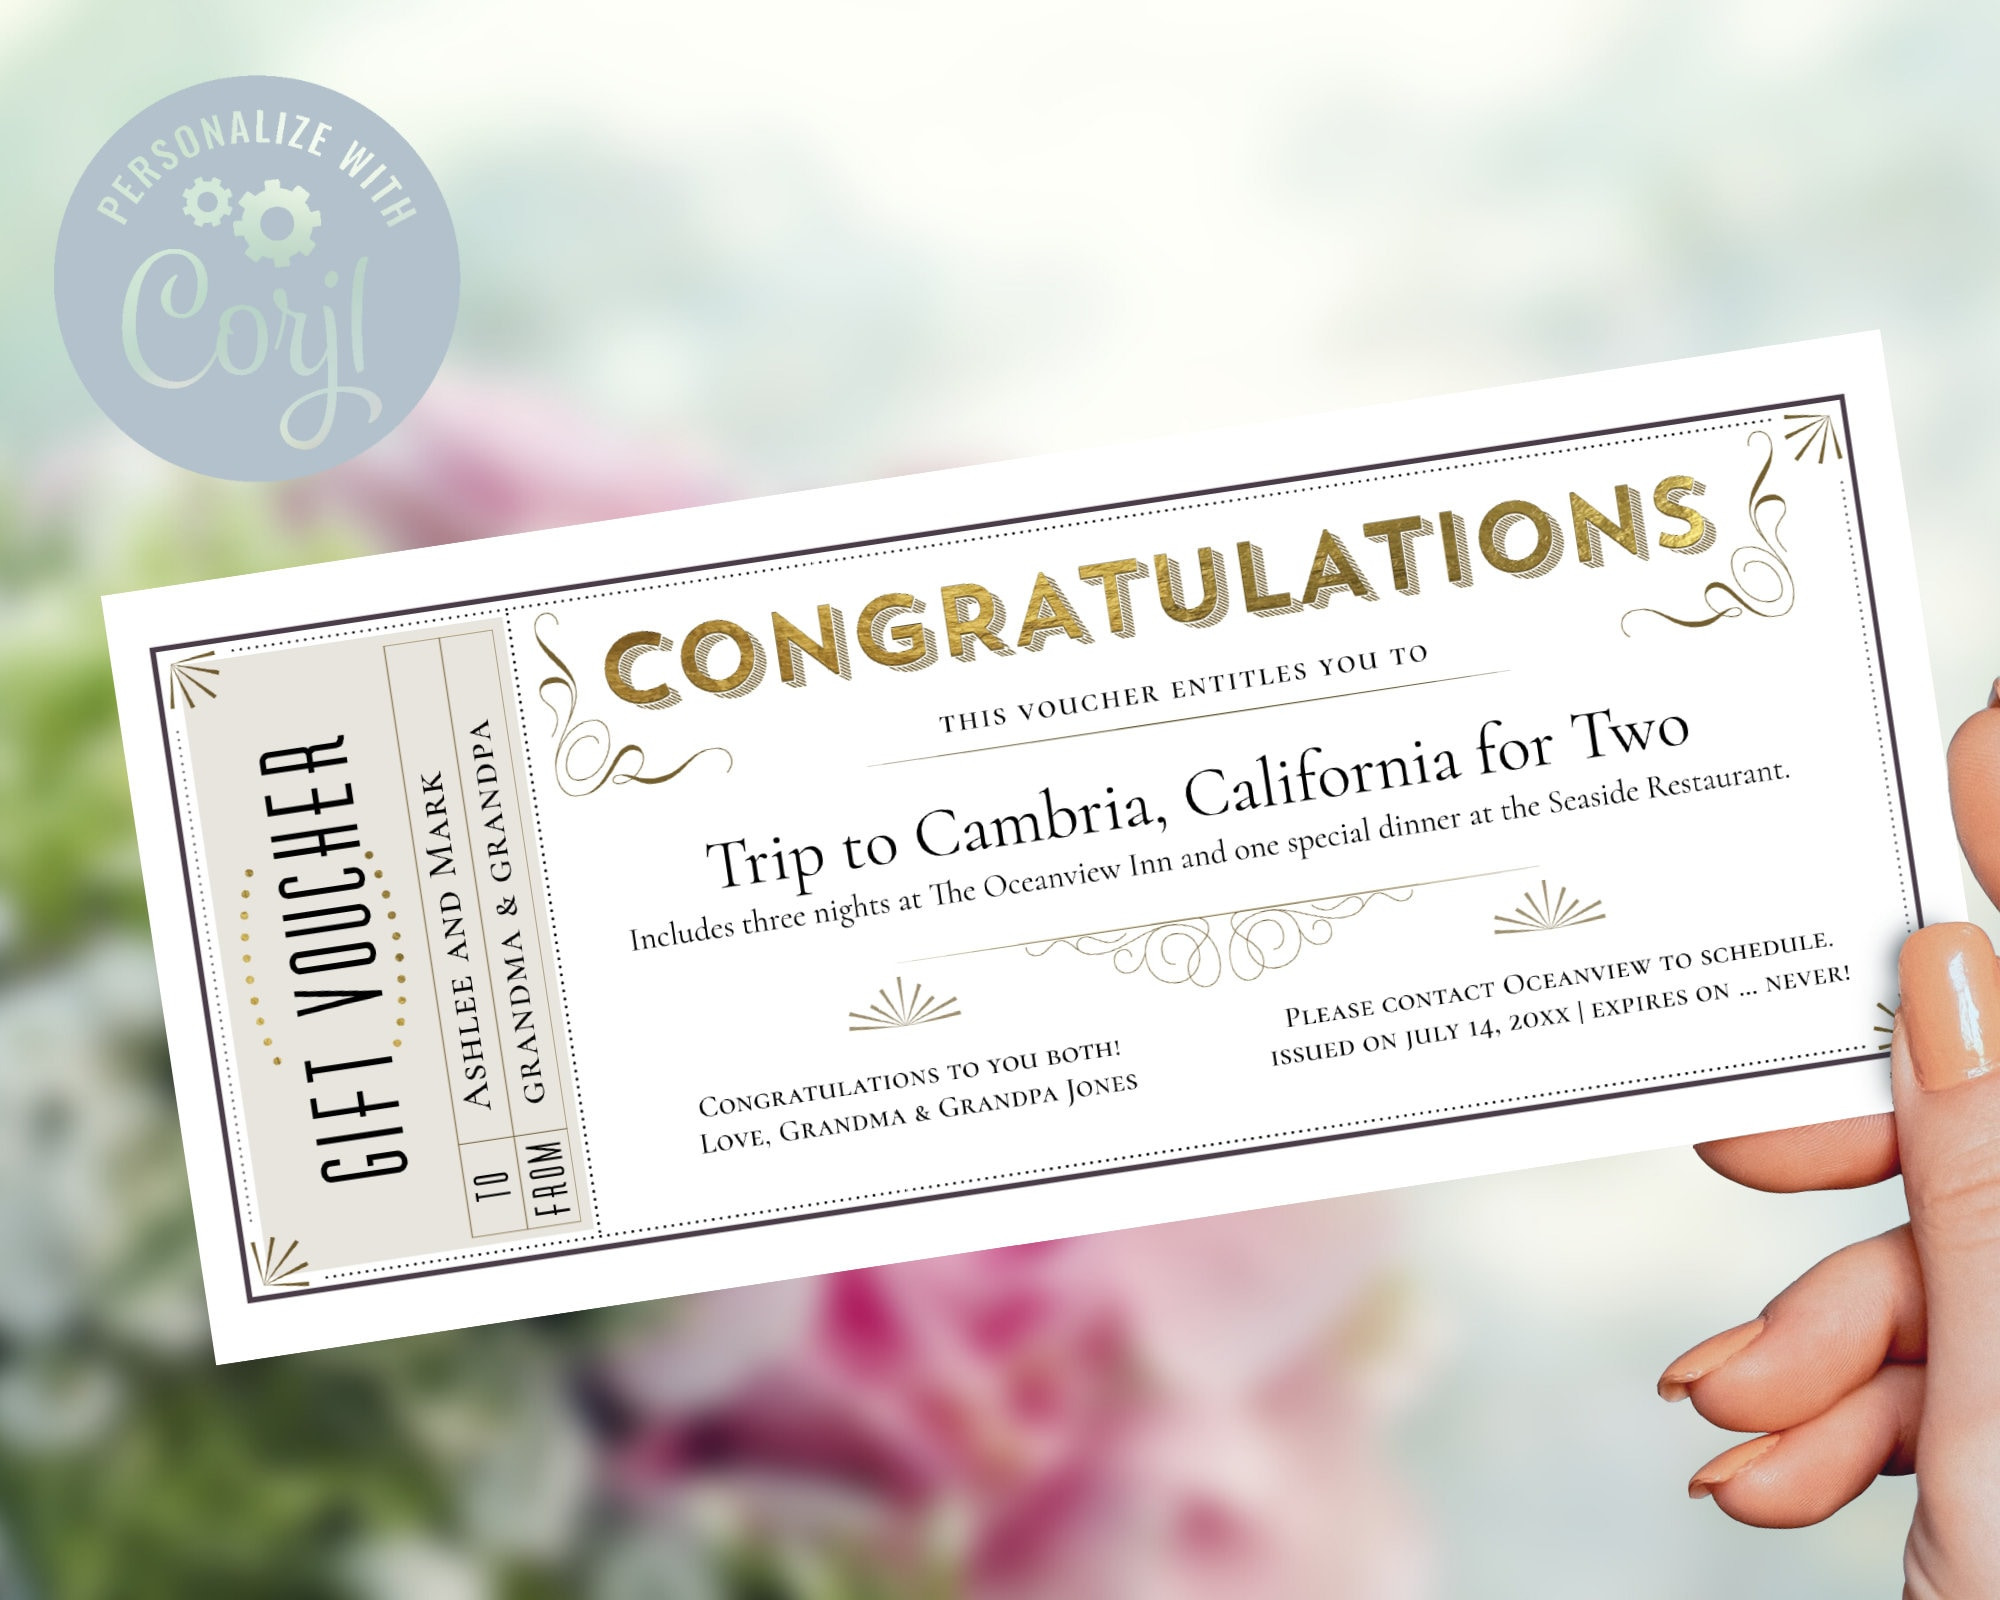 Congratulations Gift Certificate Template / Editable Gift – Etsy For This Entitles The Bearer To Template Certificate